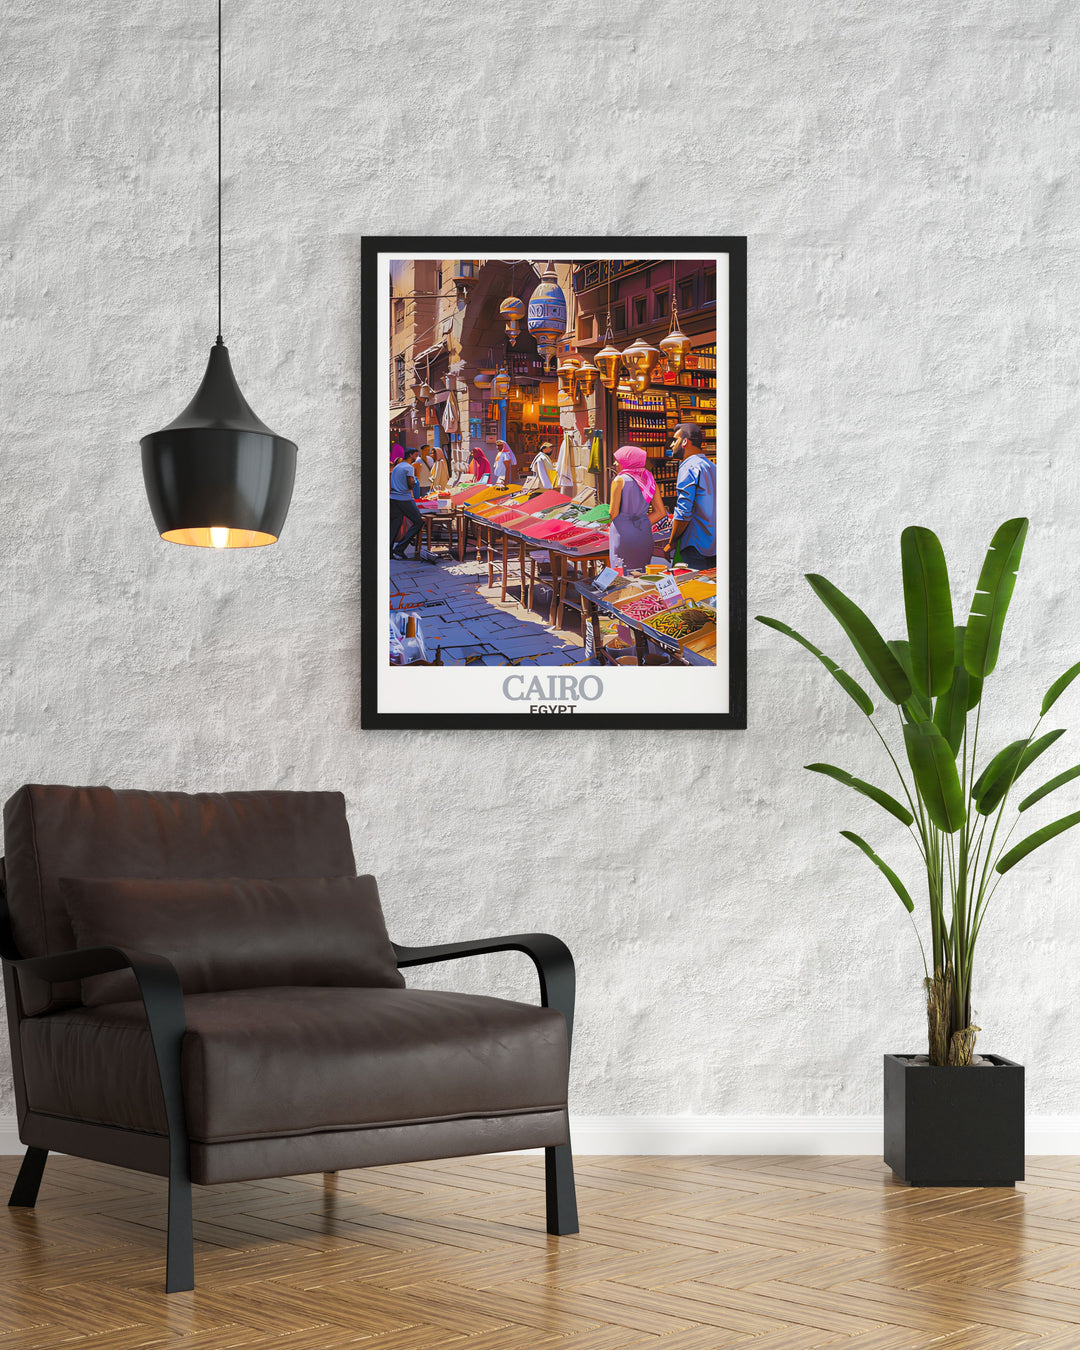 Enhance your home with this minimal travel art featuring the iconic Khan El Khalili Bazaar in Cairo a perfect piece for those who appreciate unique and captivating cityscape photography